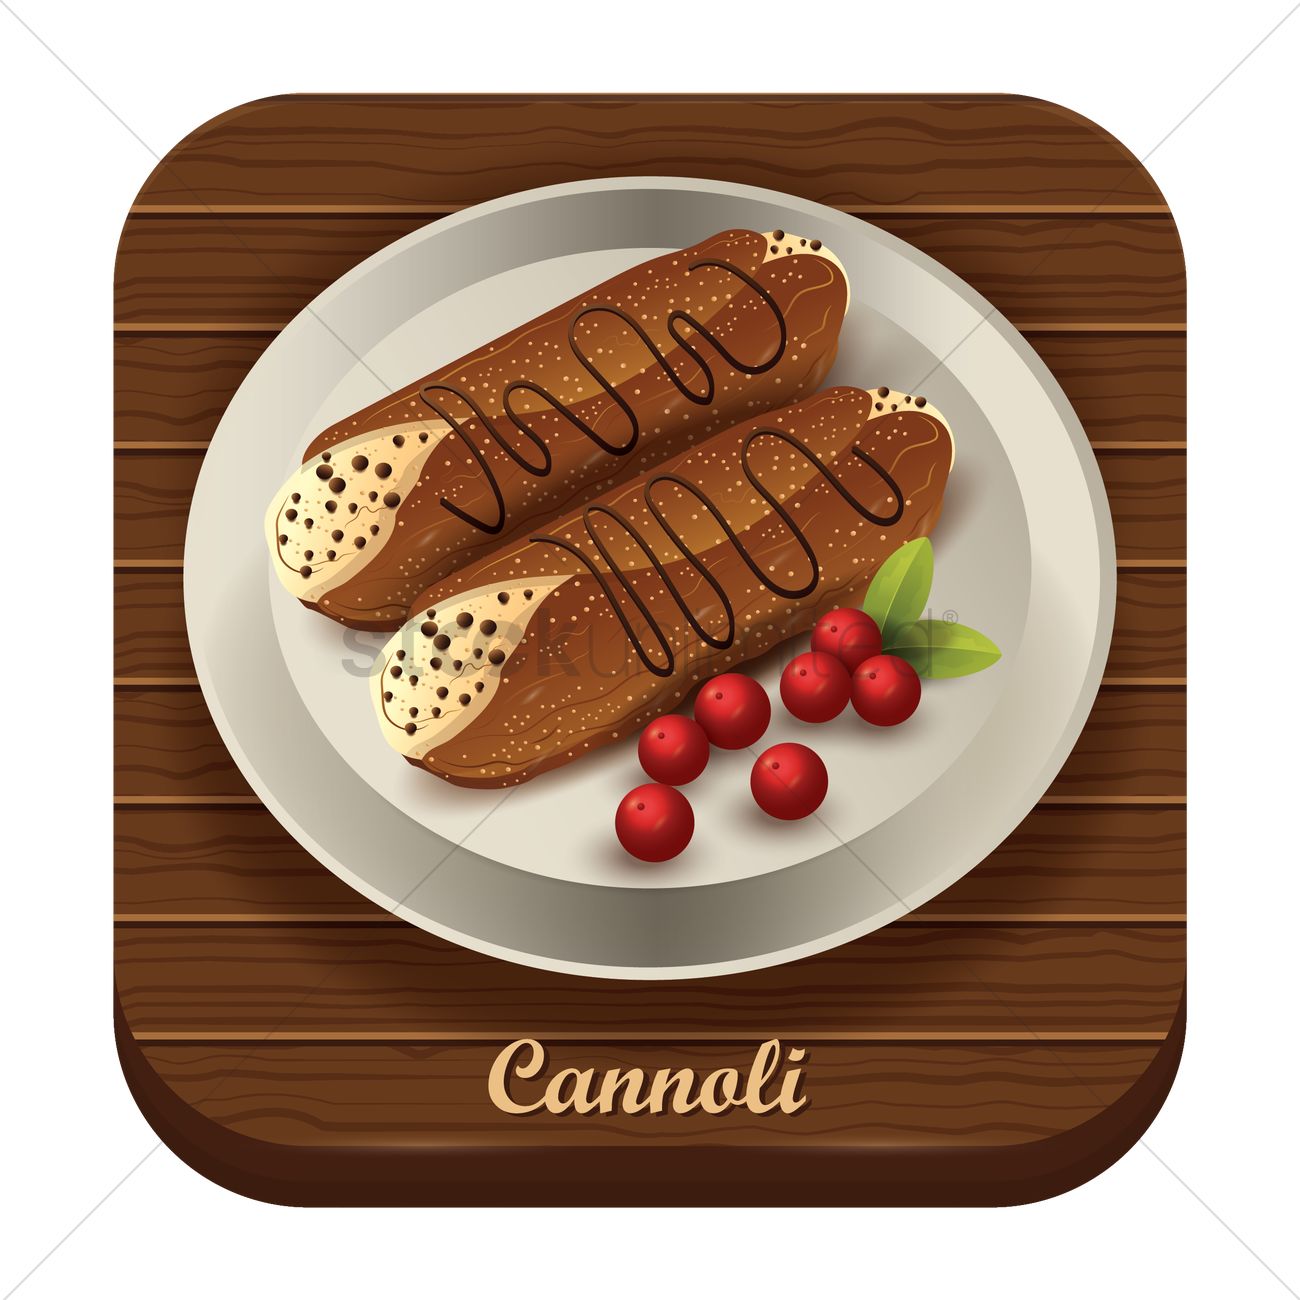 Cannoli Vector at Collection of Cannoli Vector free